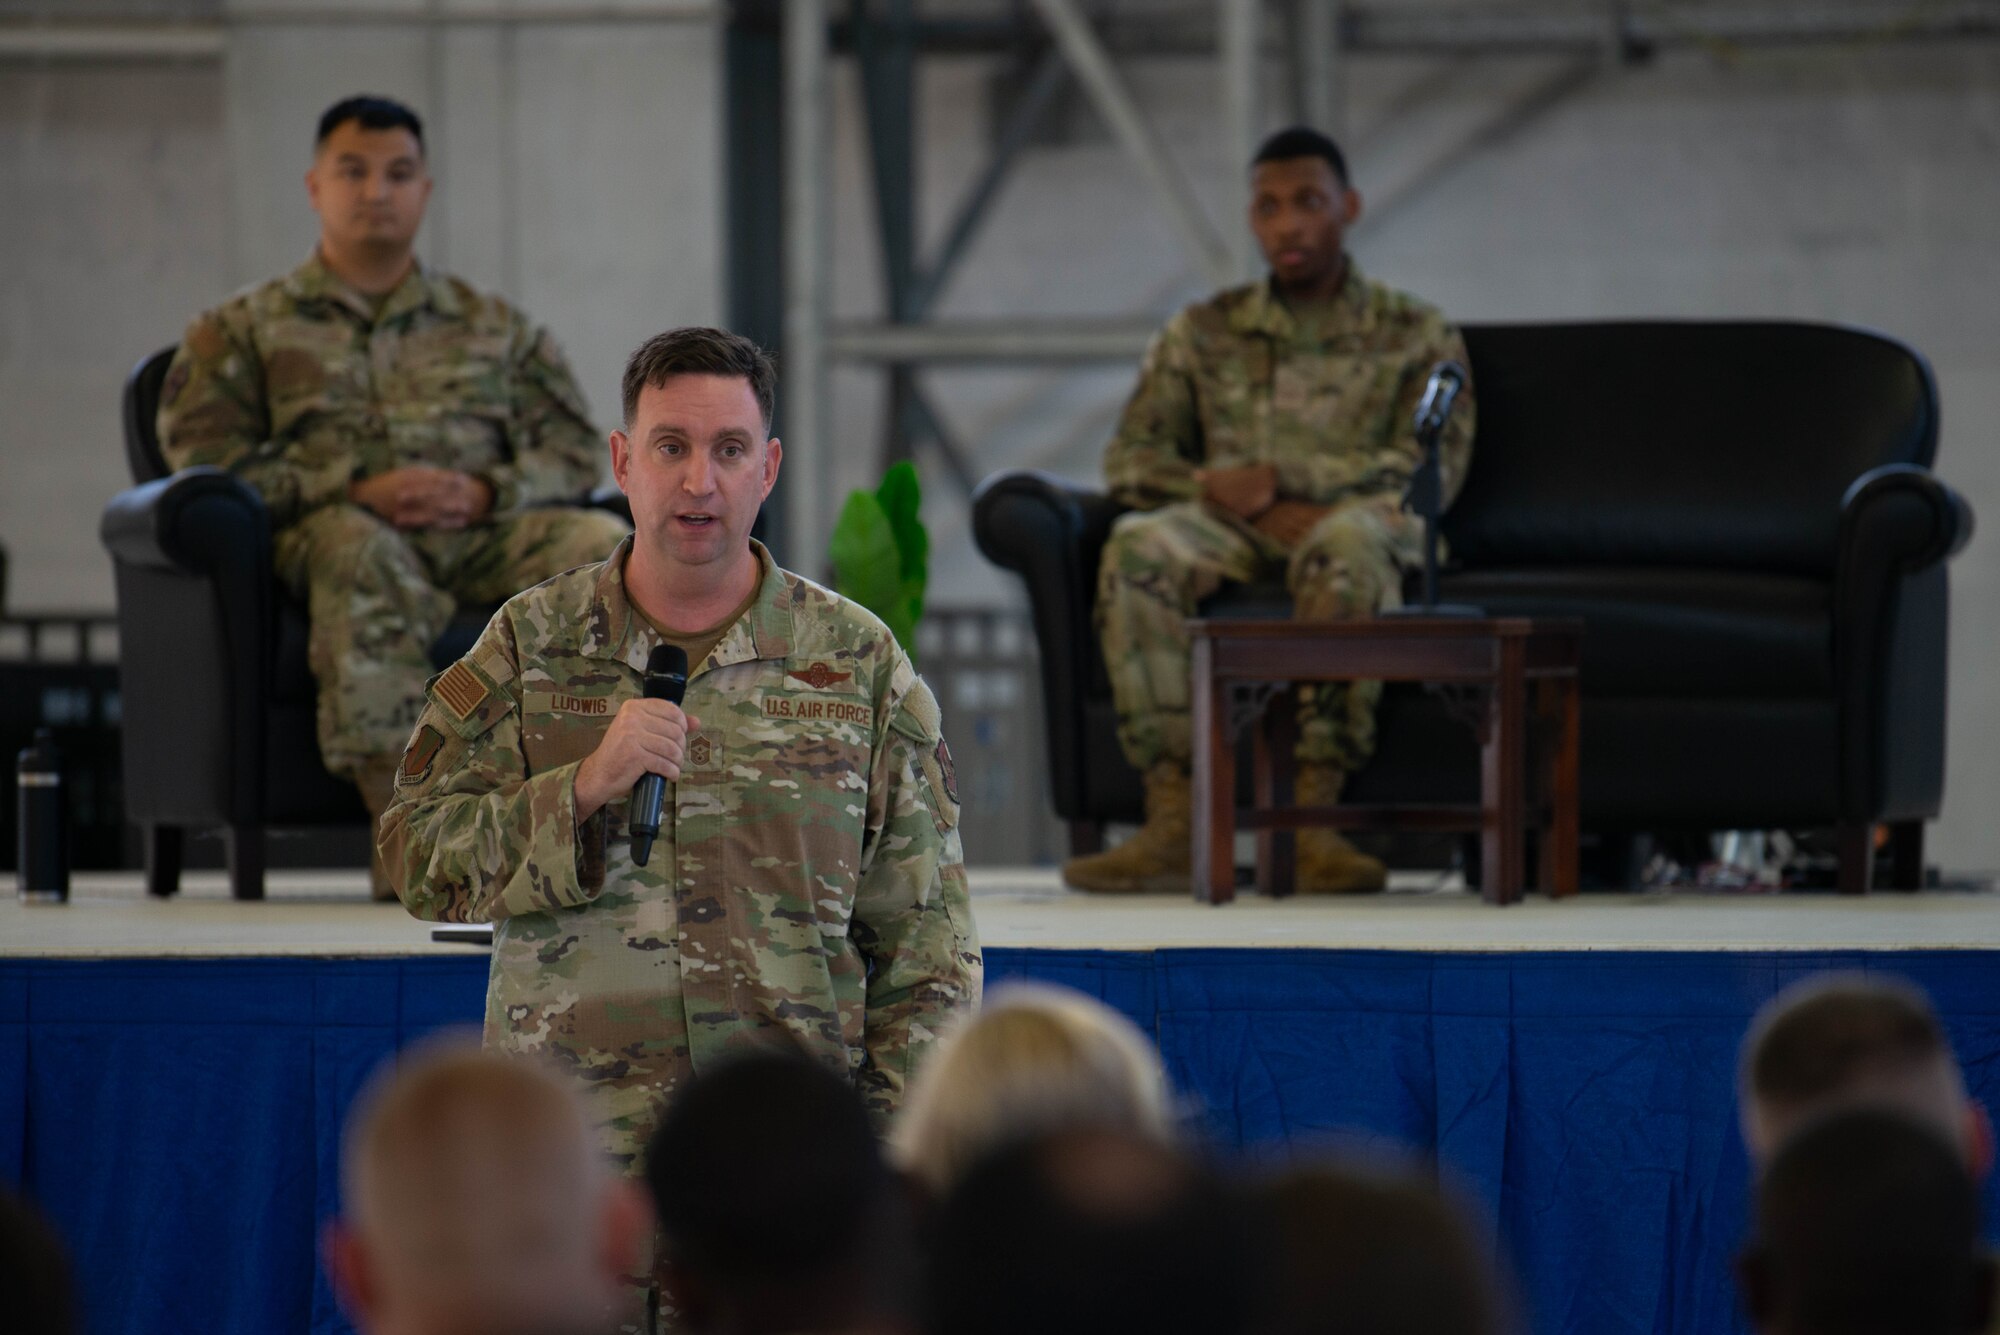 Wing command chief gives remarks at the beginning of a storytellers event